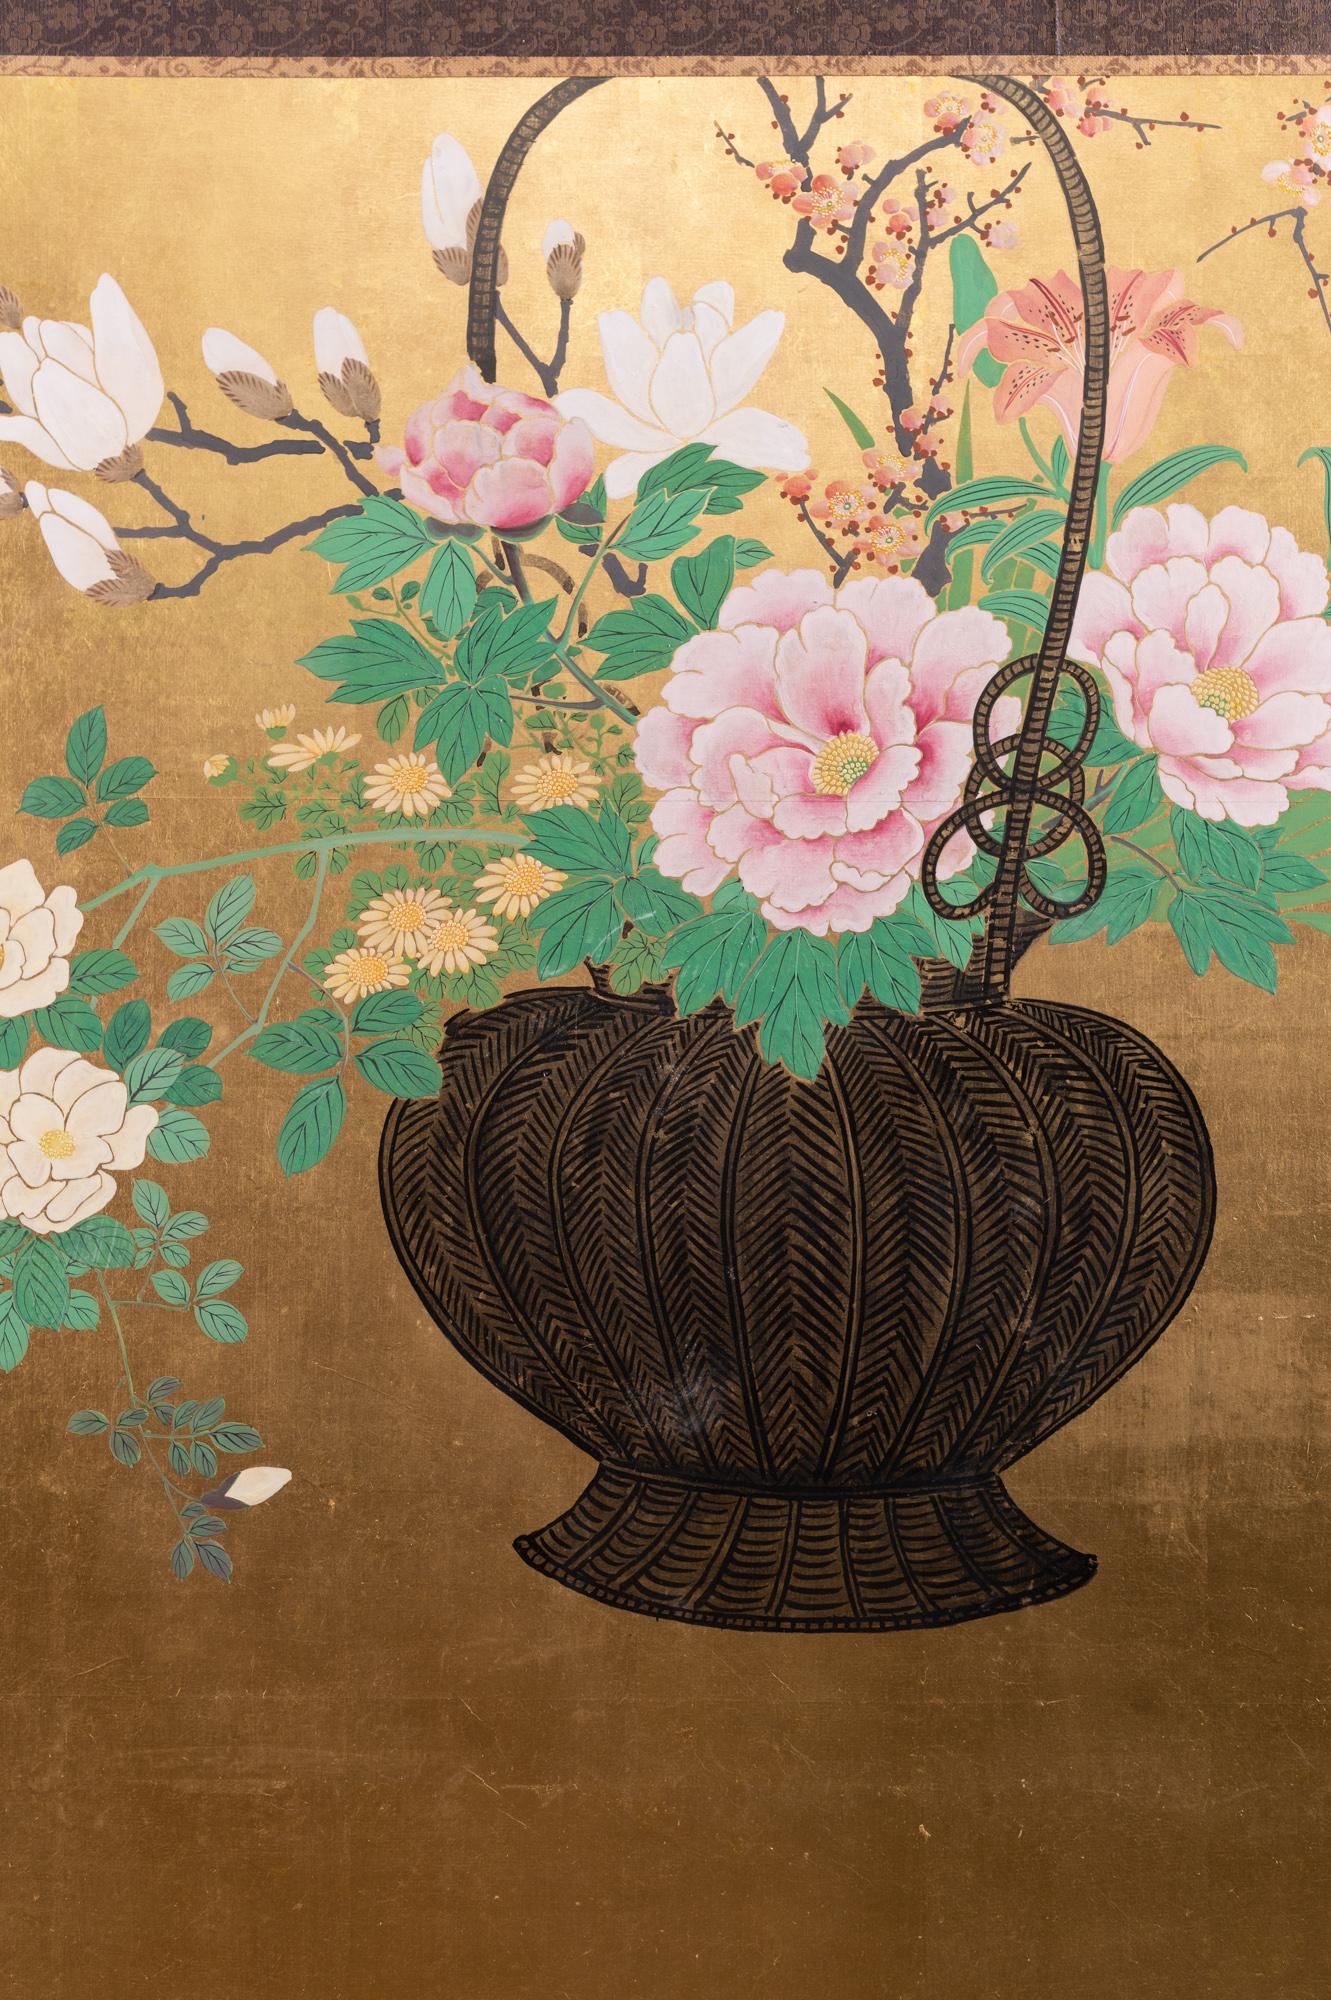 Japanese two-panel screen: Ikebana on gold. Meiji period (1868-1912) painting of a basket with beautifully arranged spring flowers in the style of ikebana (Japanese traditional flower arranging). Lovely use of negative space and composition. Mineral